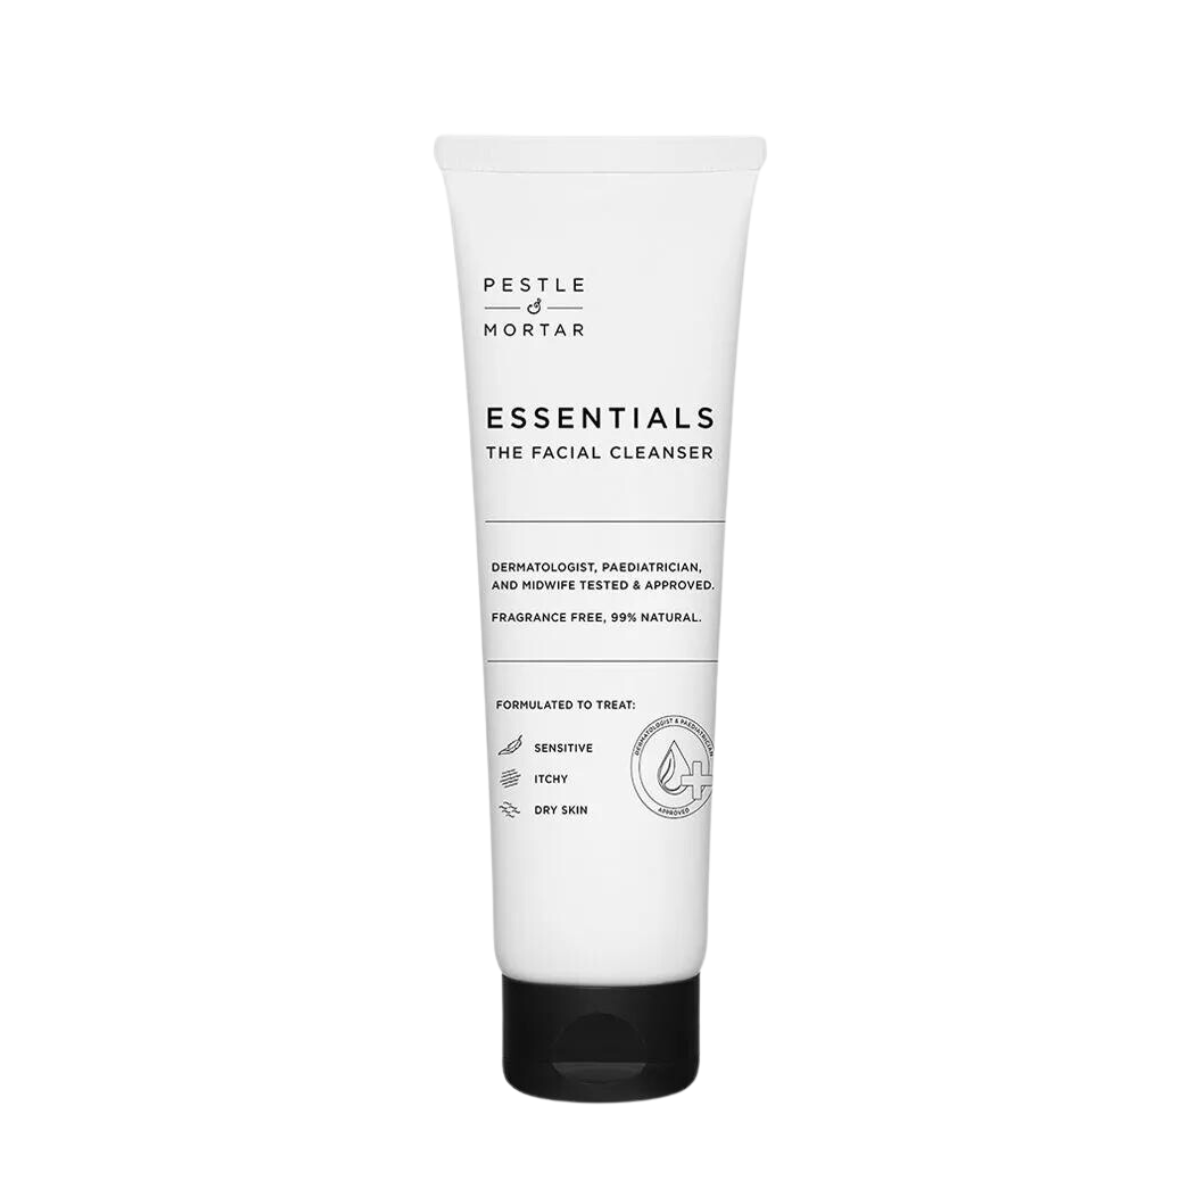 Pestle & Mortar Essentials - The Facial Cleanser Tube